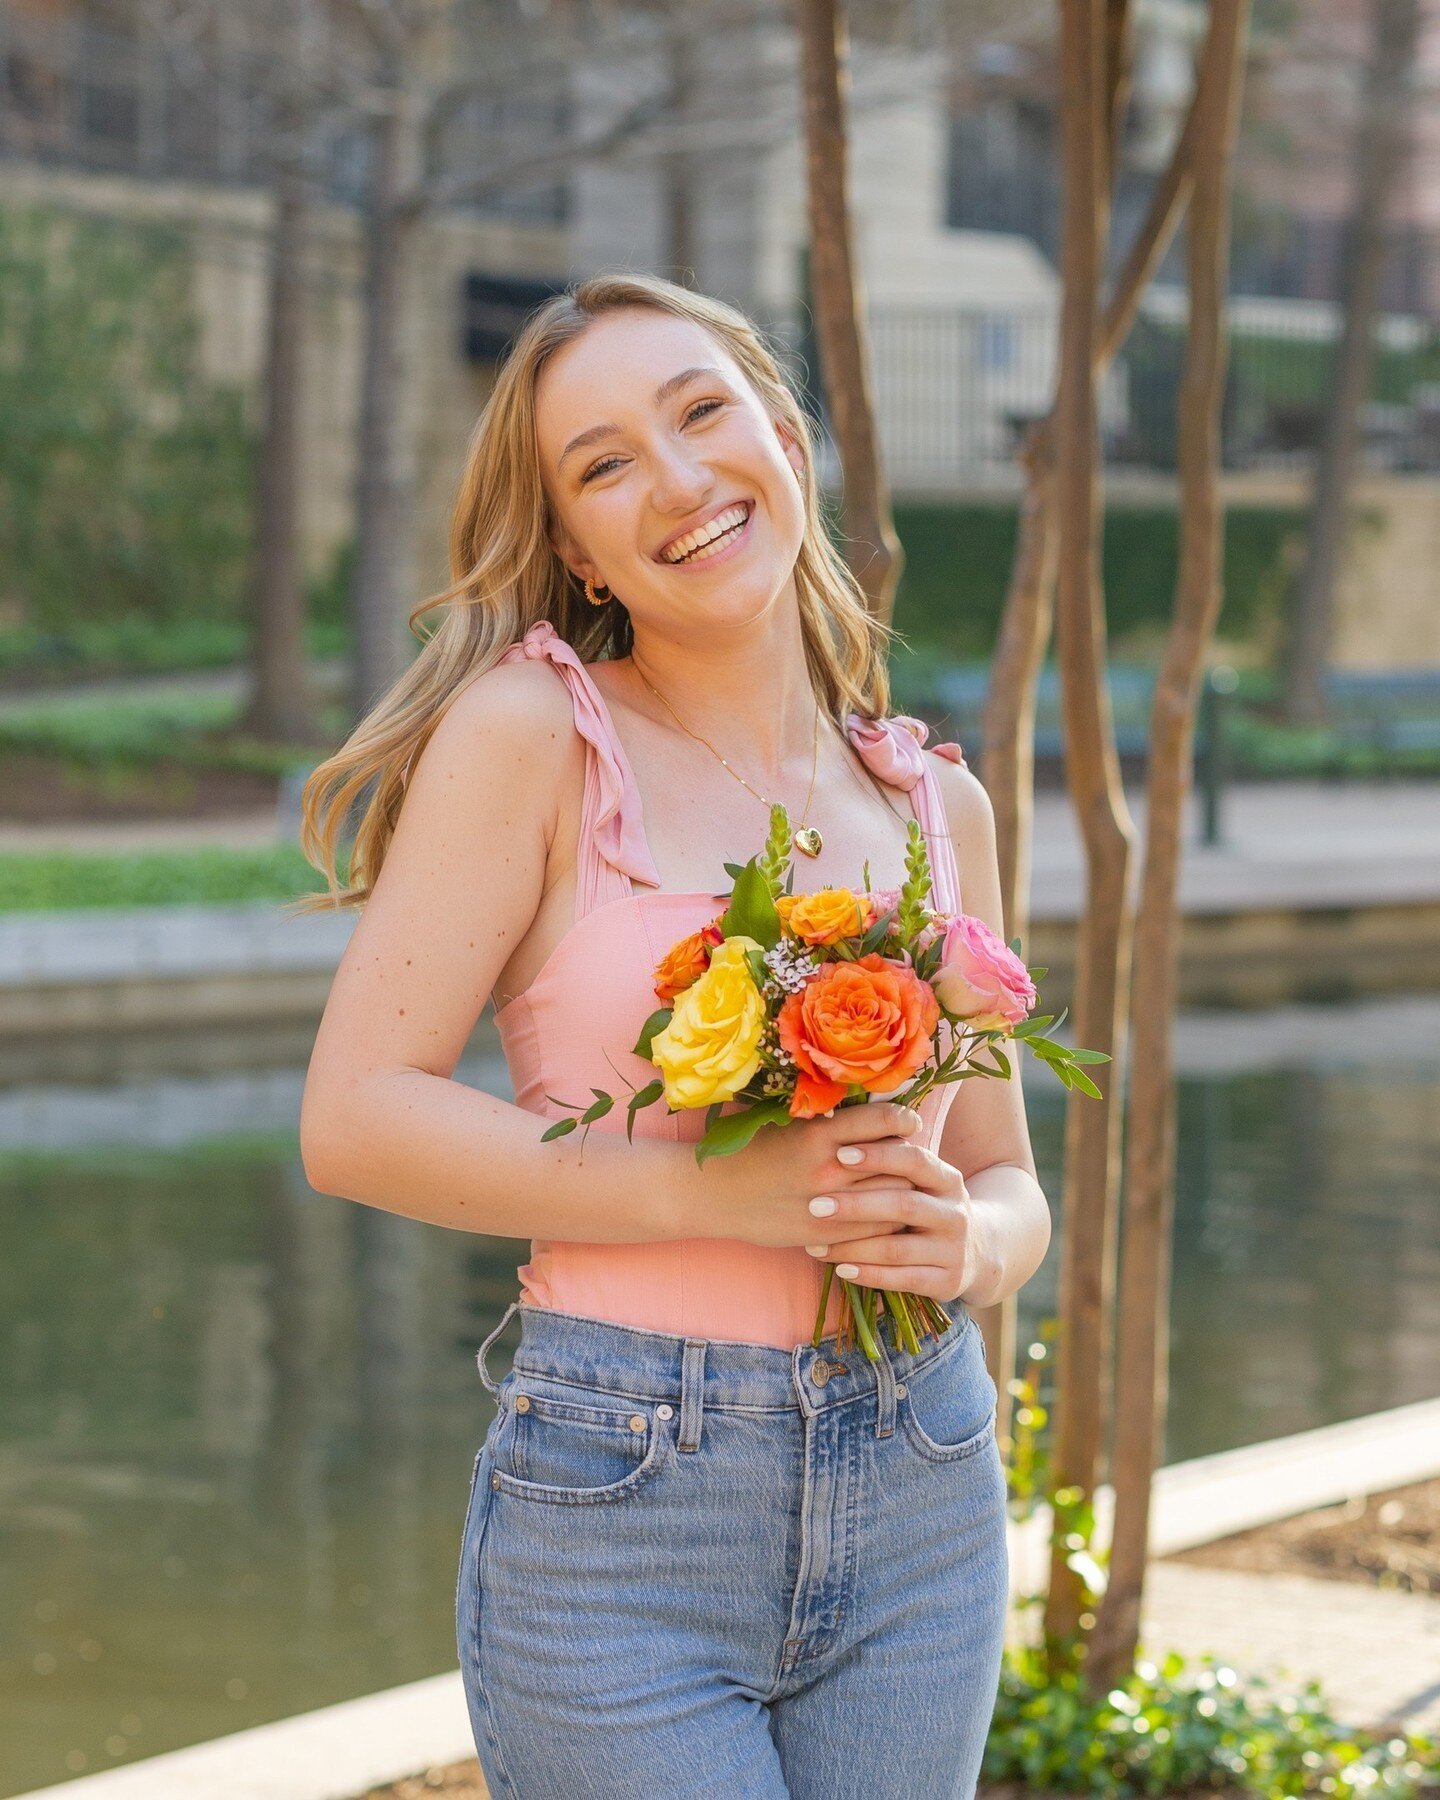 a special sneak peek from @sheamcleodd&rsquo;s senior session at that NEEDED a spot in the feed!! ✨ shea was absolutely STUNNING and how cute is her lil bouquet from @pineyrosefloral!?! 💐 i simply can&rsquo;t wait to share more from her gorgeous ses